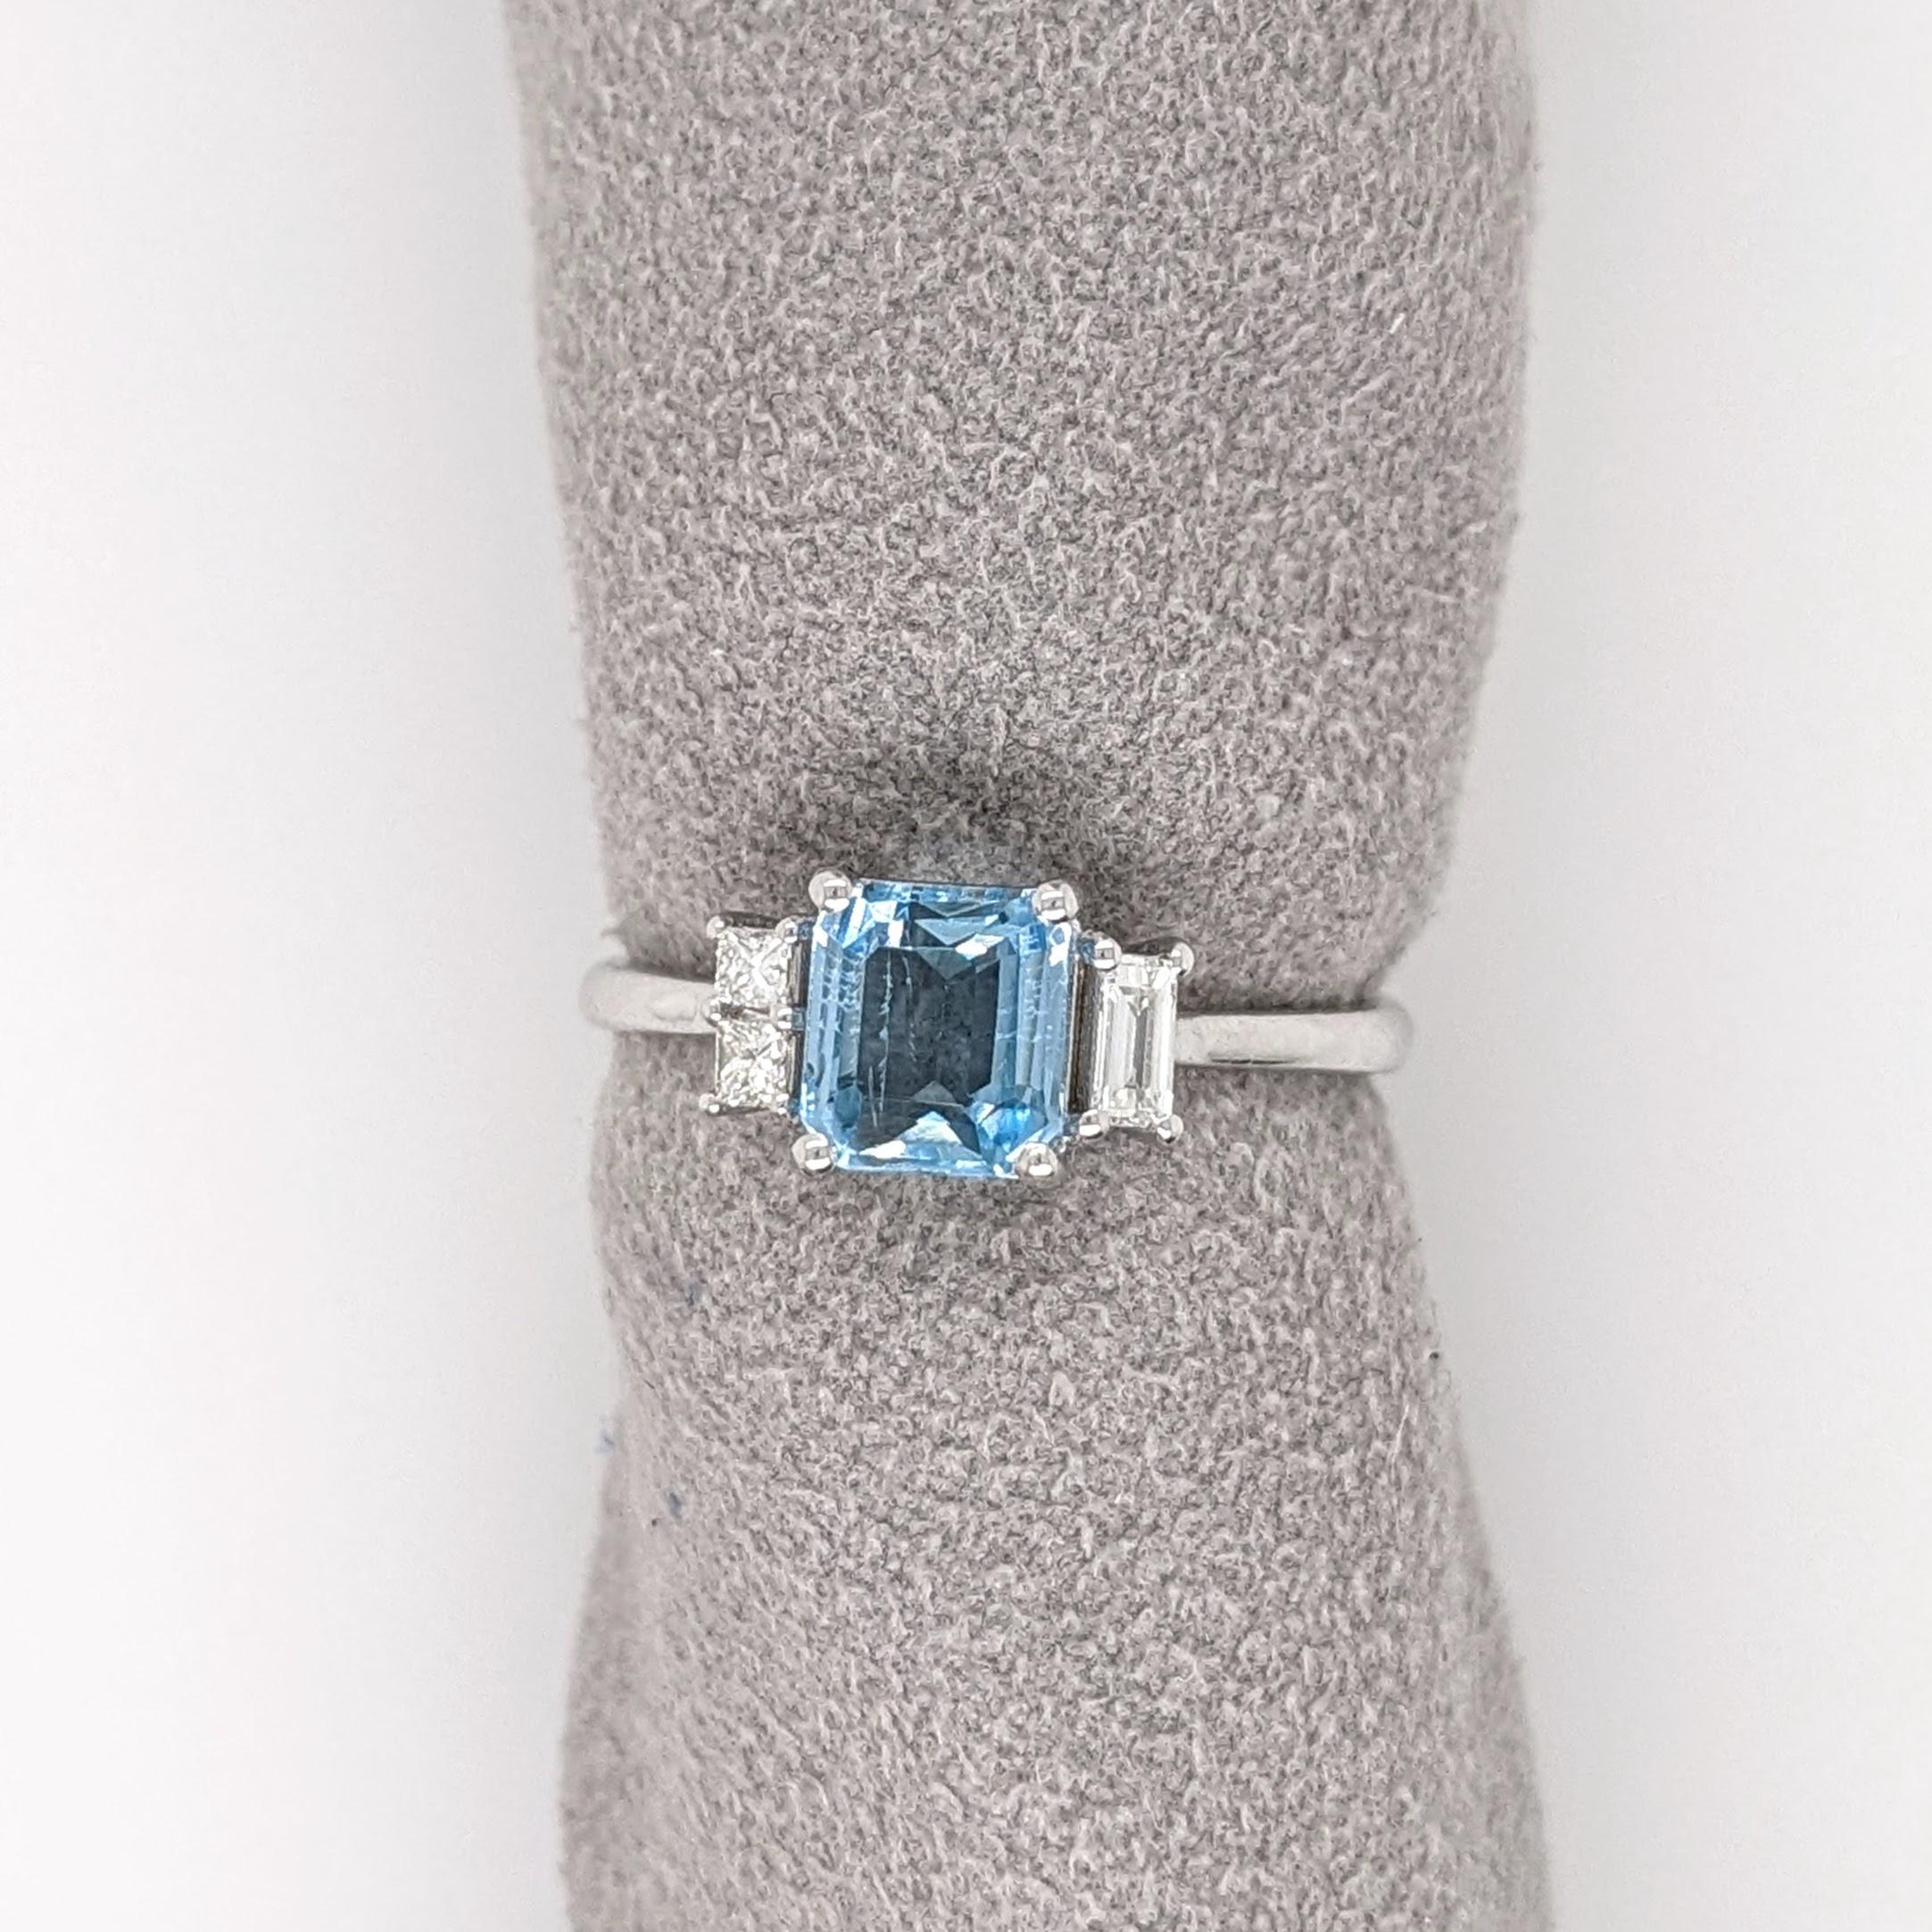 1ct Aquamarine Ring w Earth Mined Diamond in Solid 14K White Gold EM 6.5x5.5mm For Sale 3